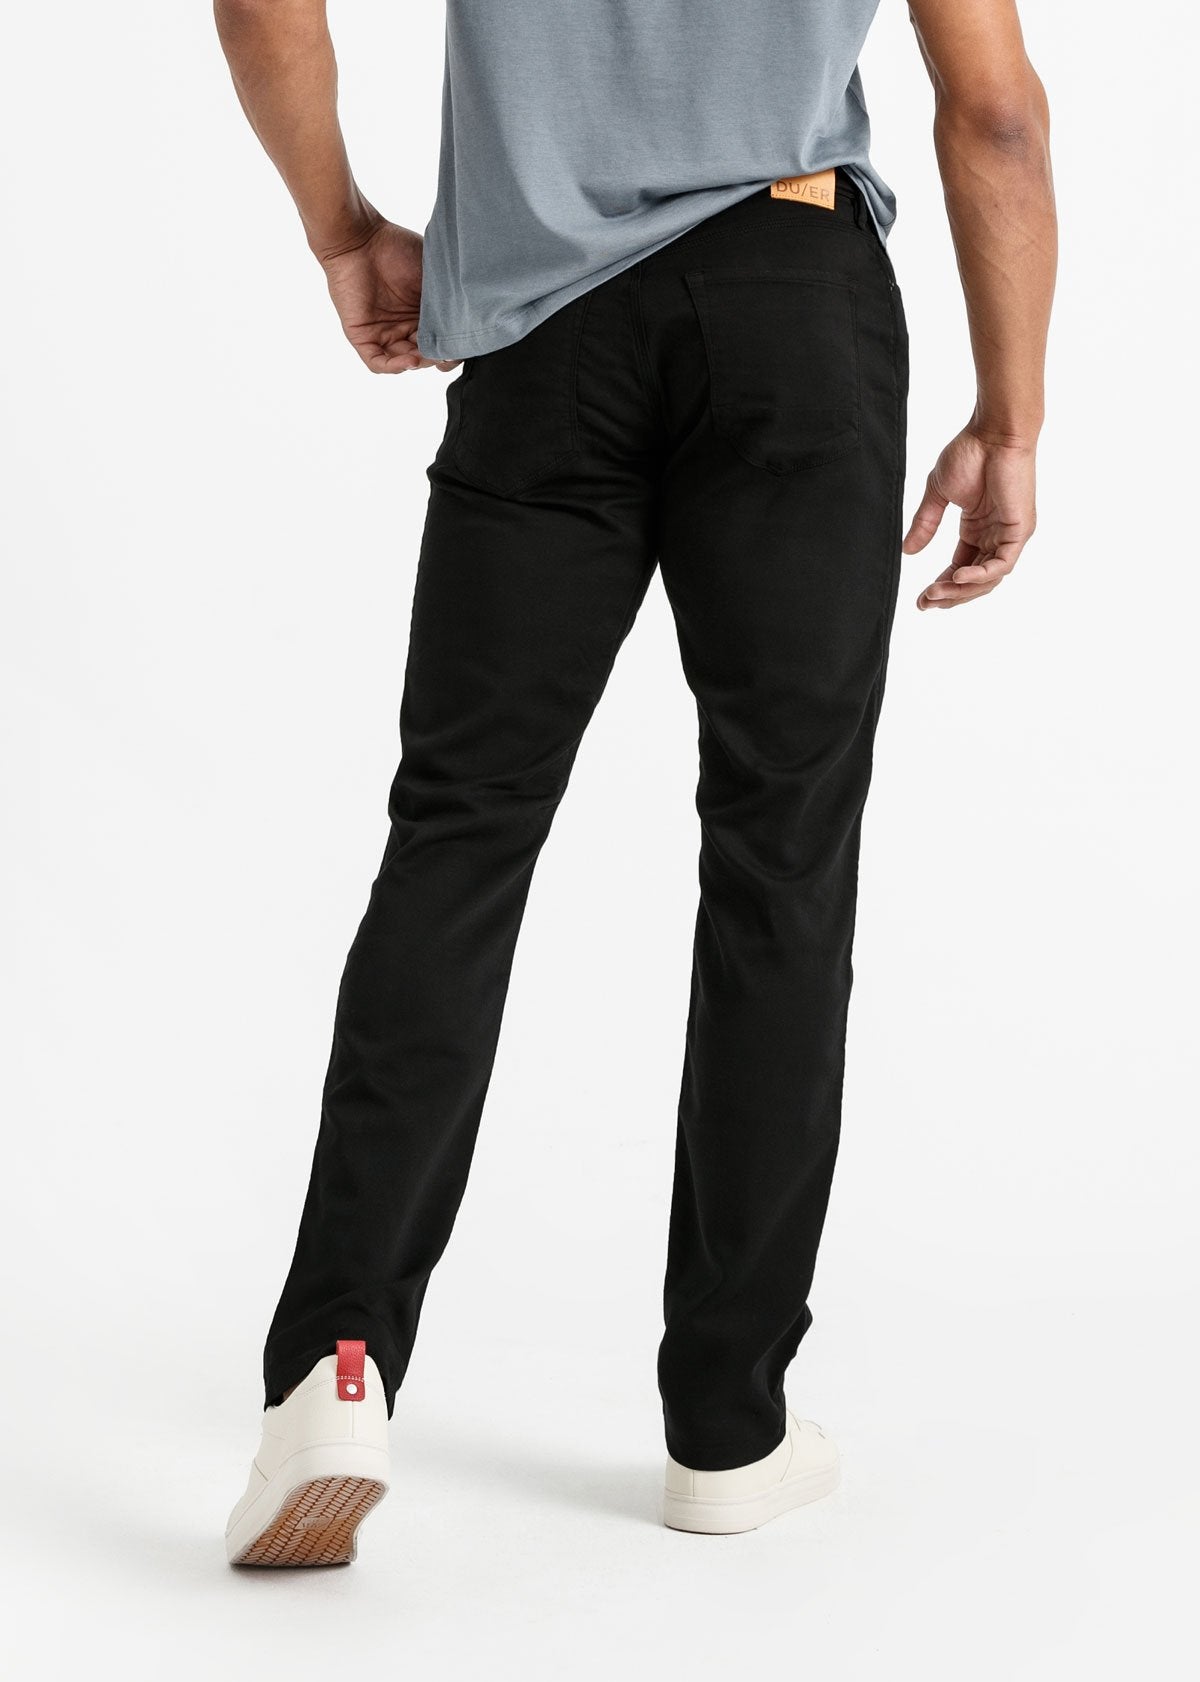 Buy online Black Solid Relaxed Fit Track Pant from bottom wear for